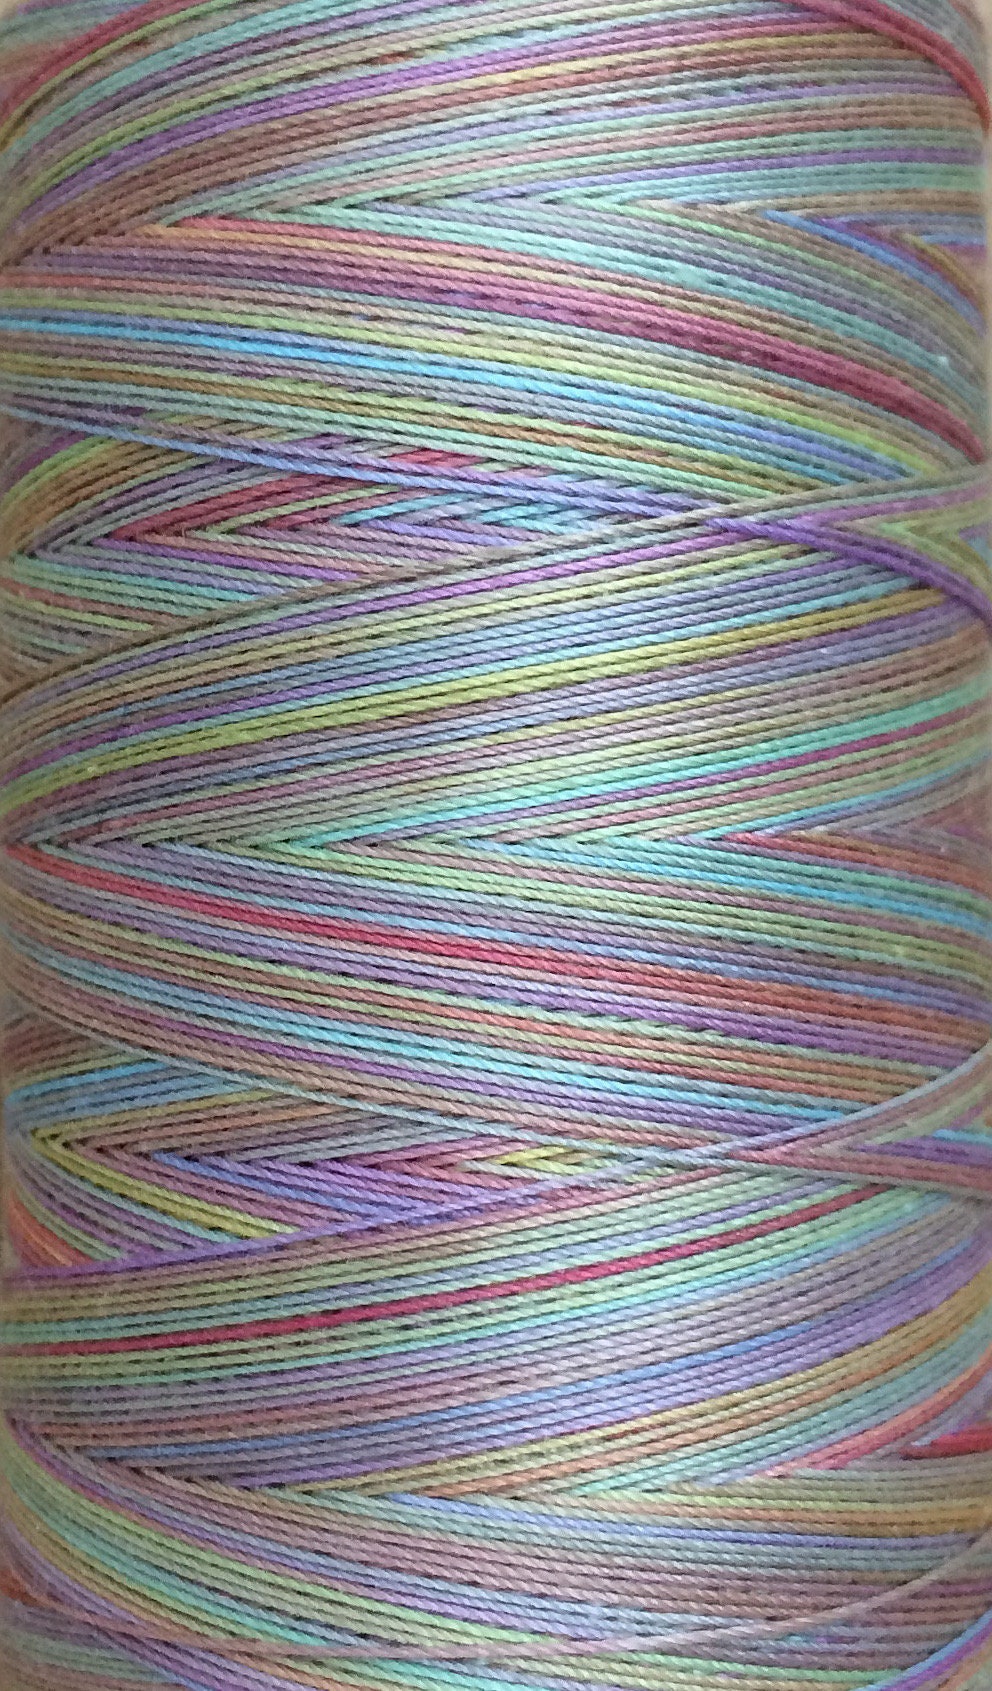 6 STRANDED COTTON, Hand Dyed Embroidery Thread, Cross Stitch Thread,  Variegated Thread, Canvaswork, Needlepoint, Sashiko Quilting 